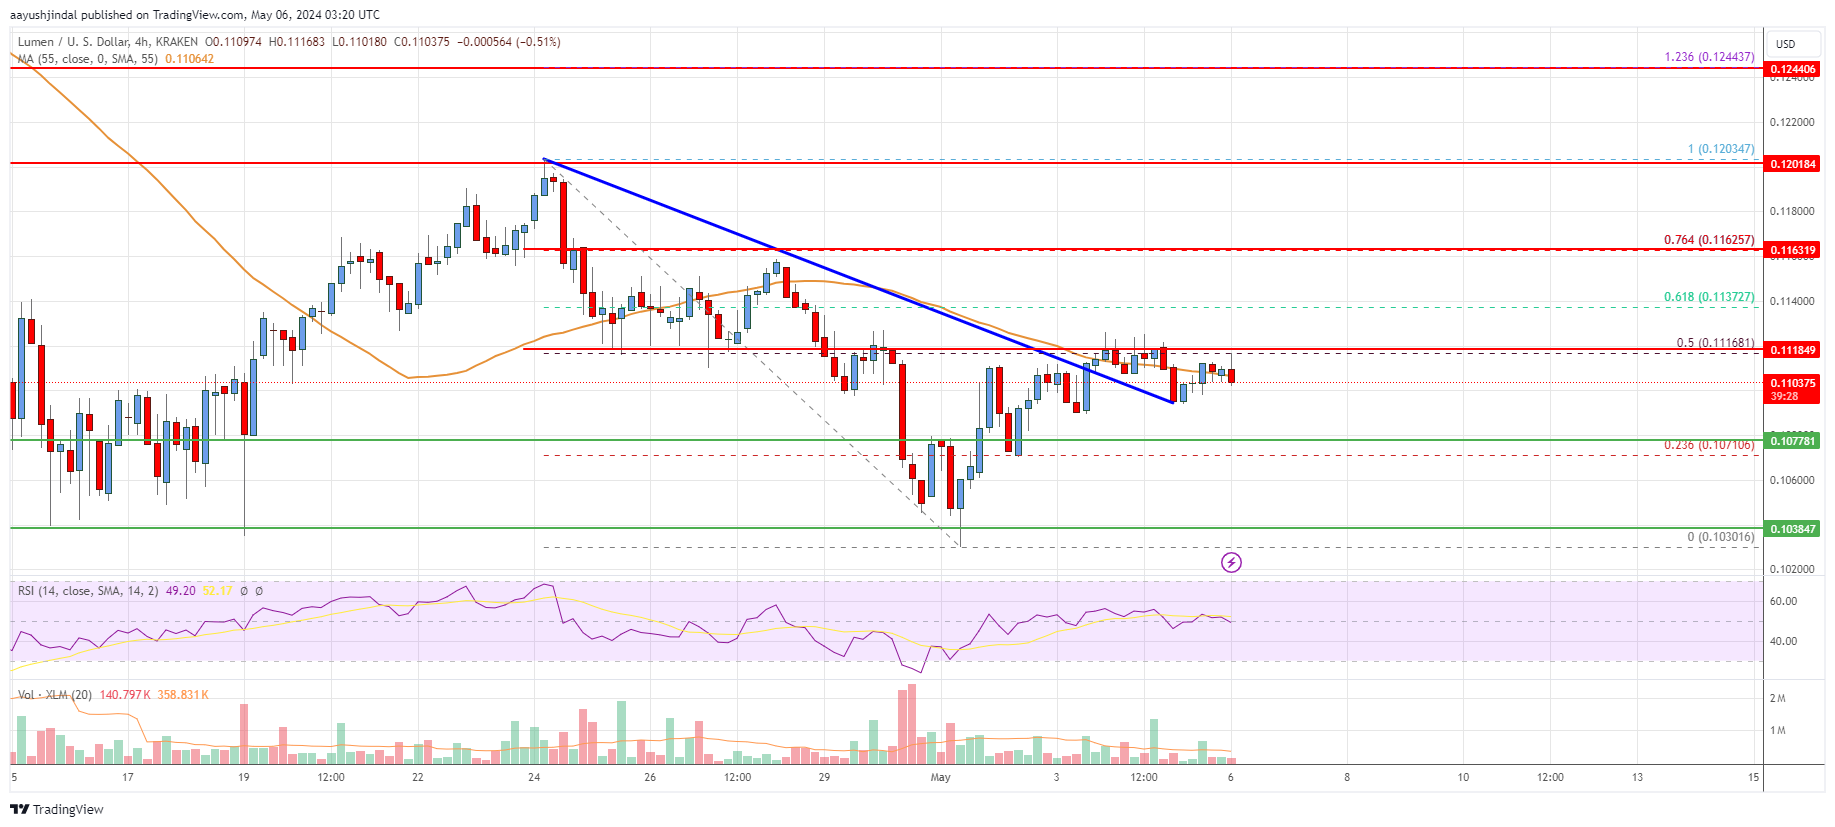 Stellar Lumen (XLM) Price Could Jump If It Clears $0.1115